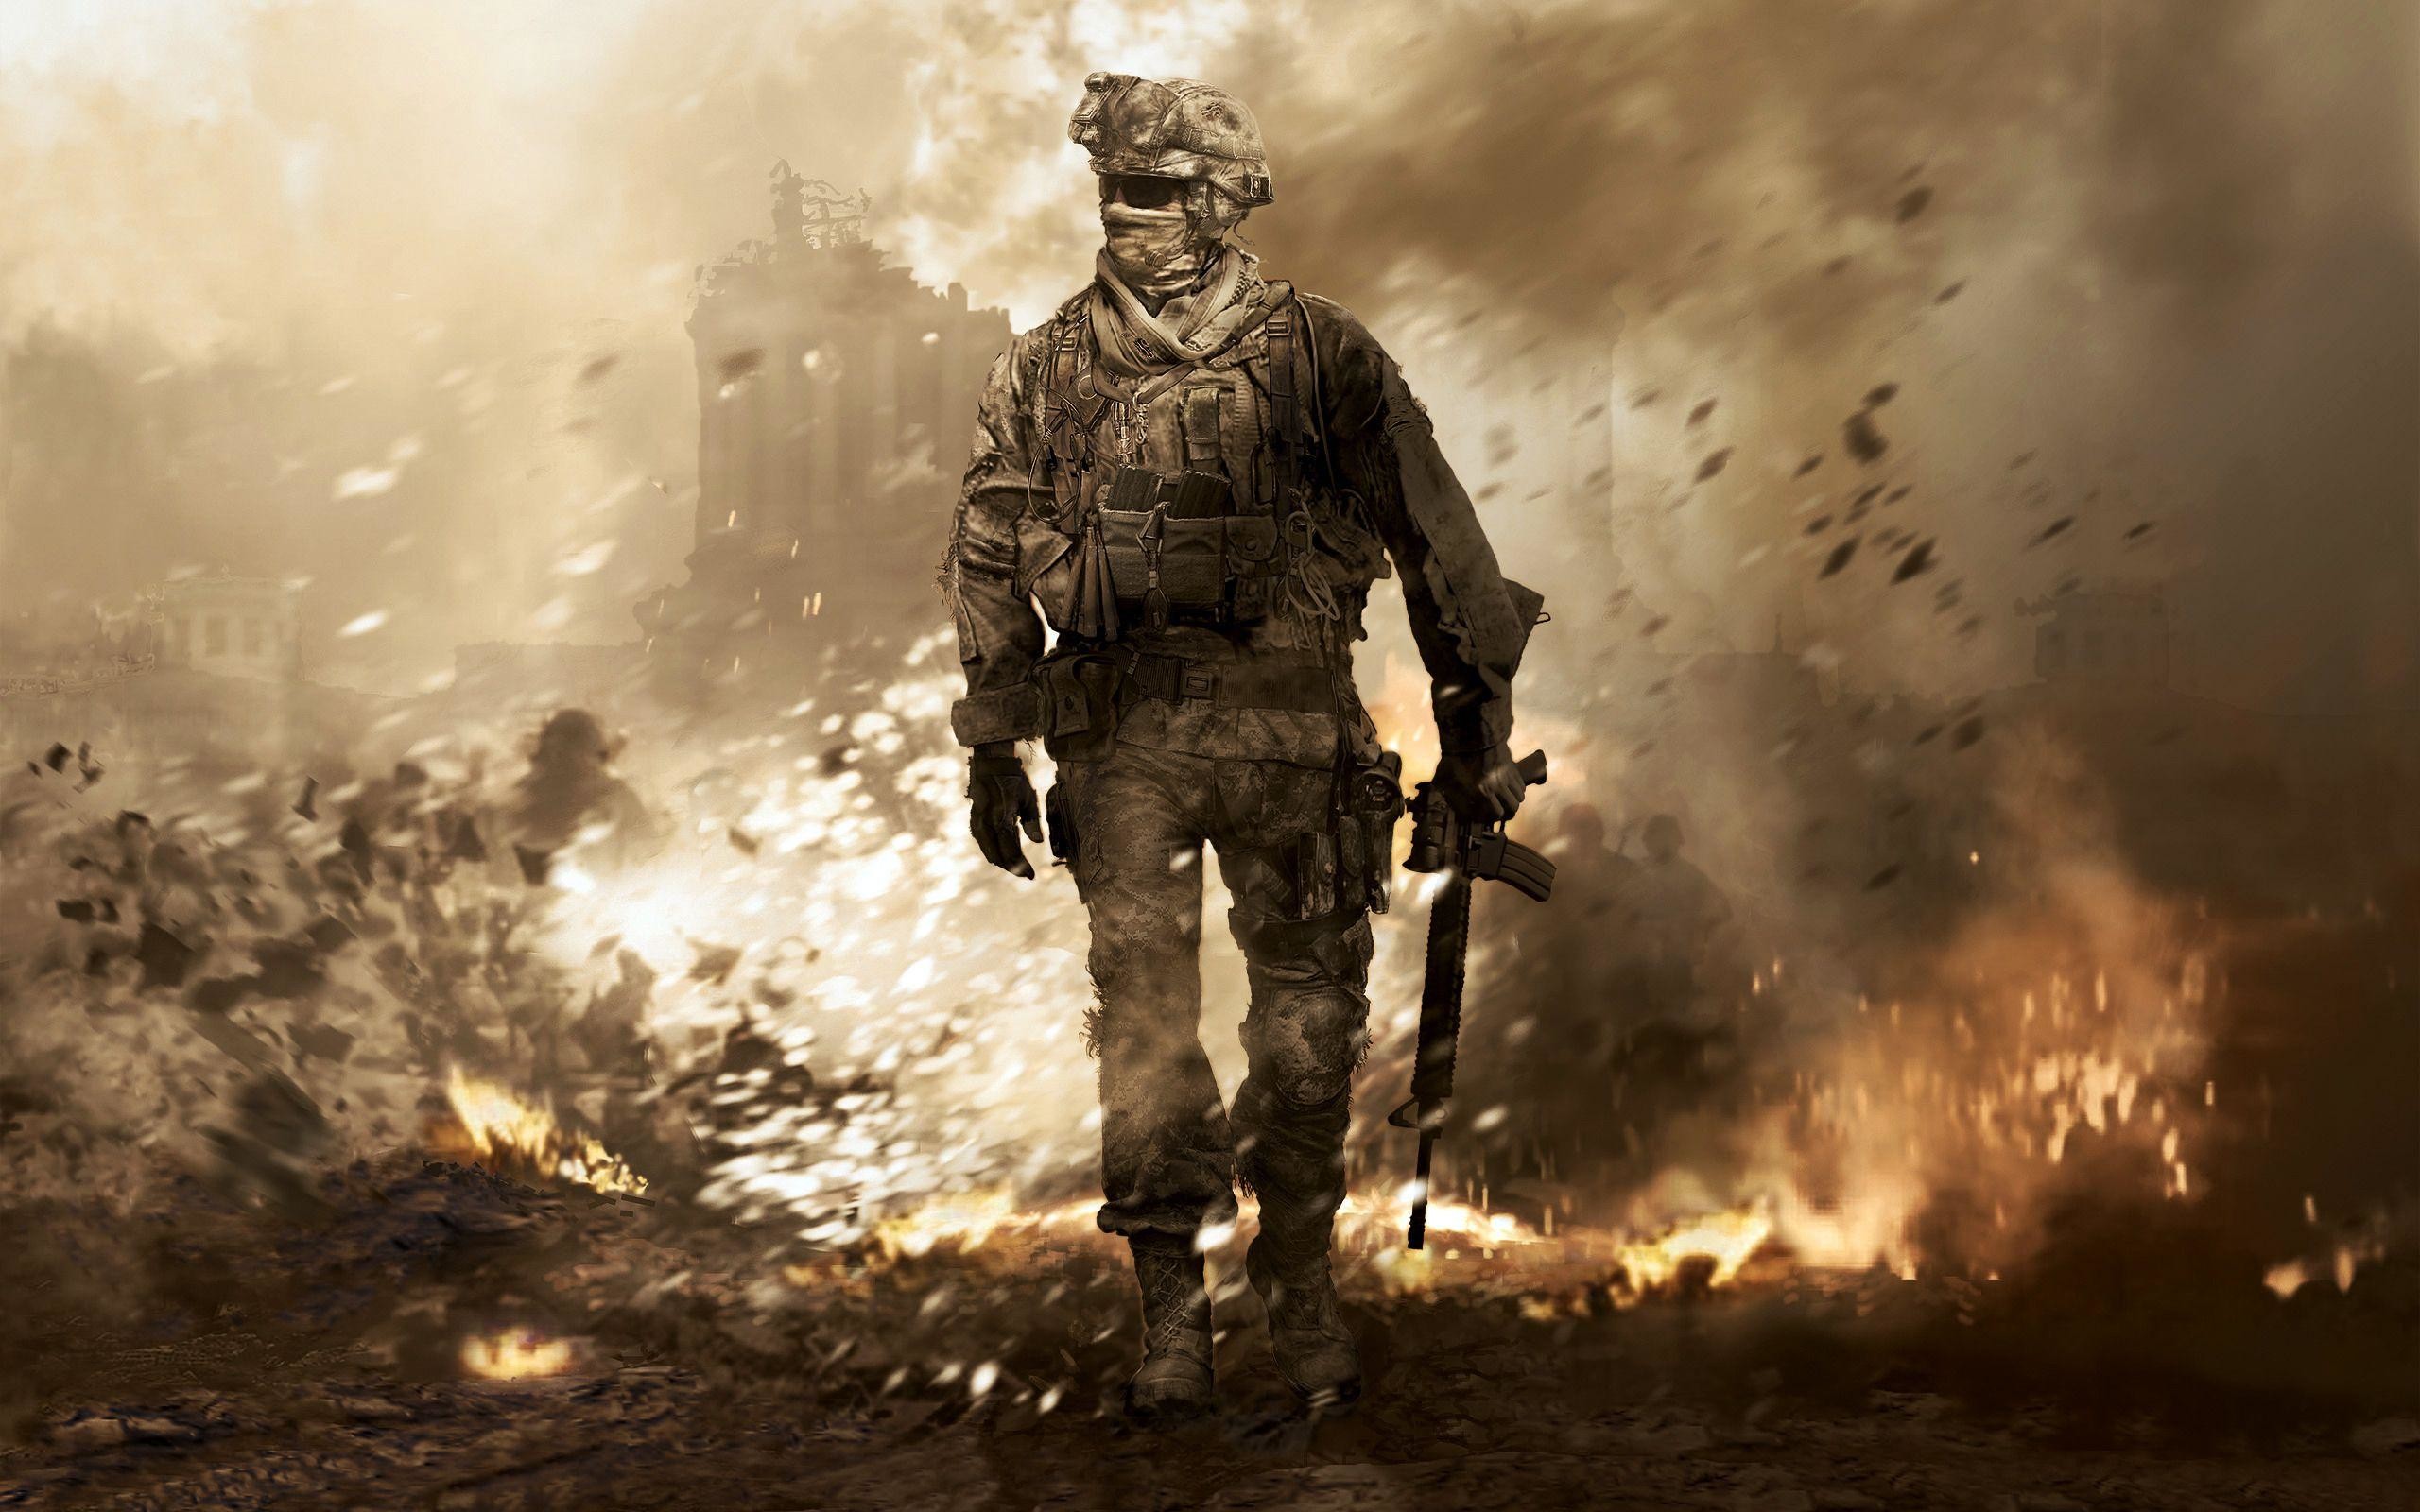 Call Of Duty Wallpaper Image